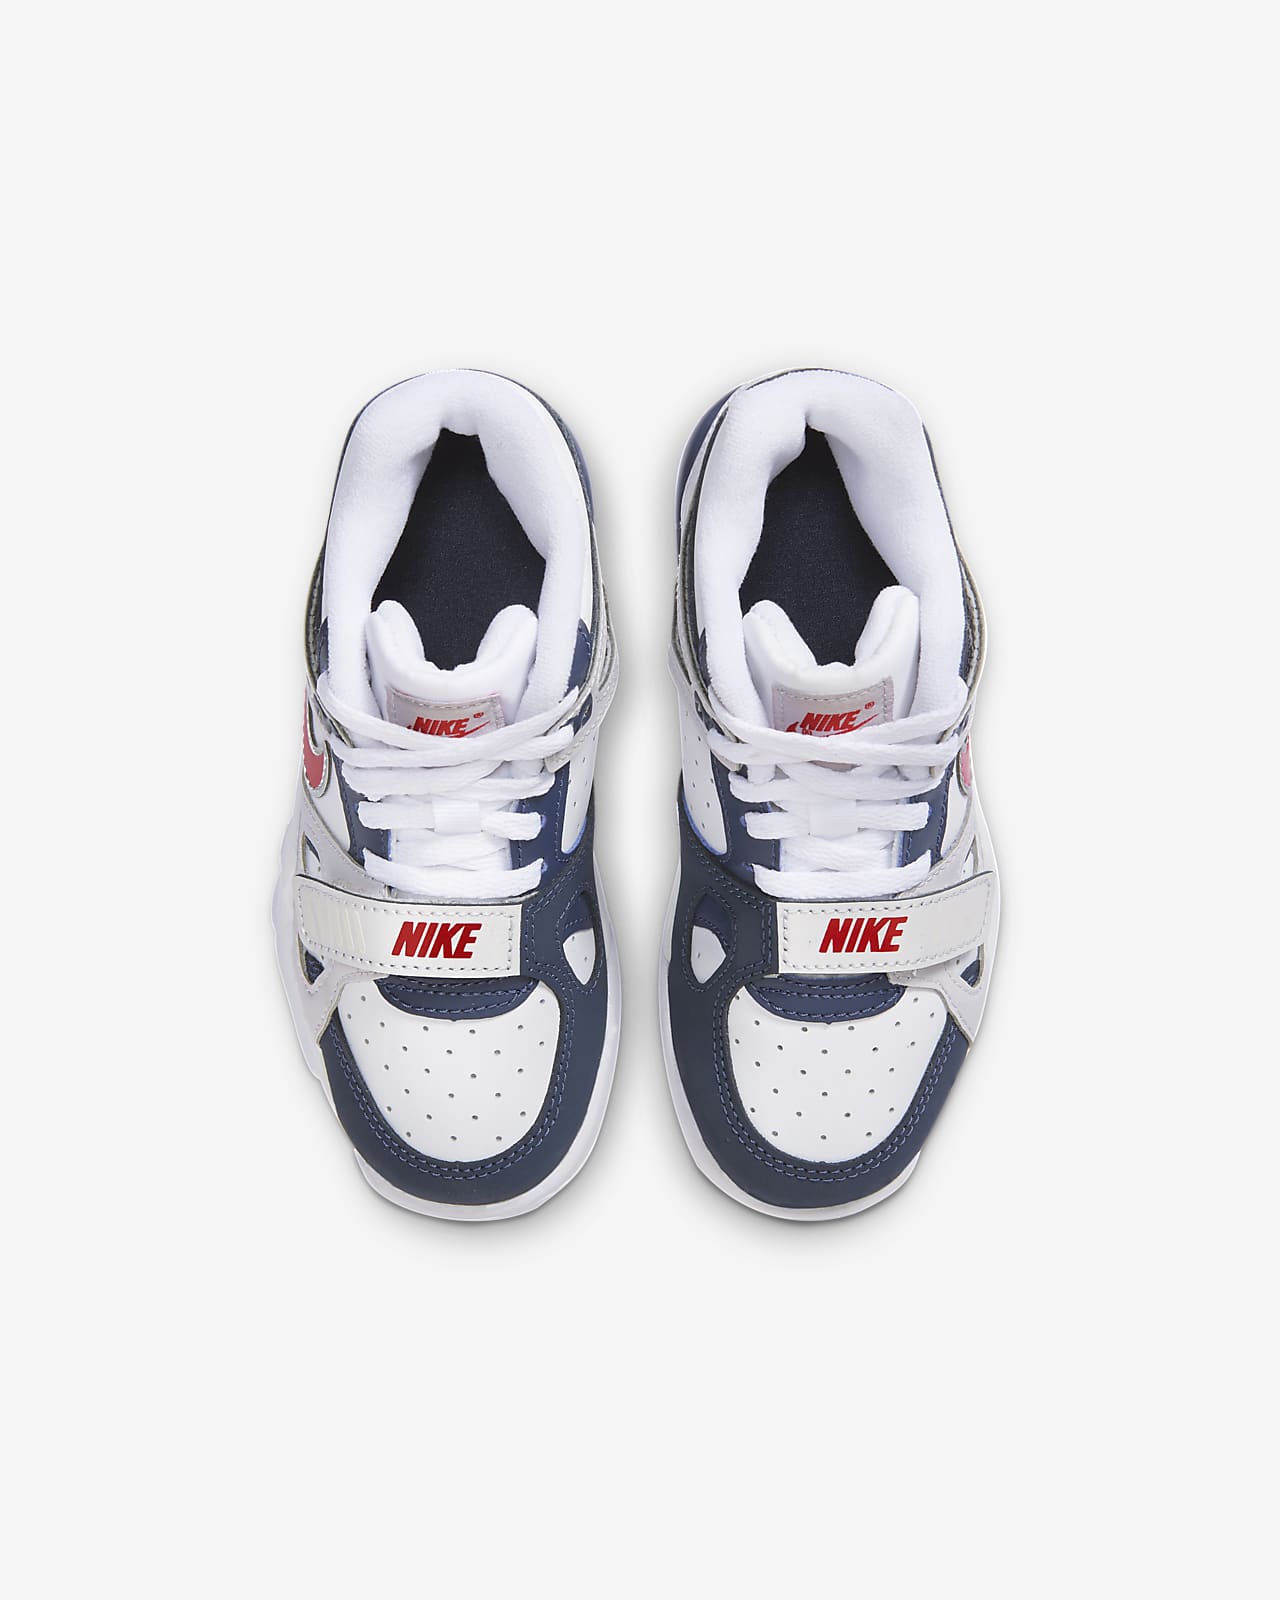 Nike Air Trainer 3 Younger Kids' Shoe 